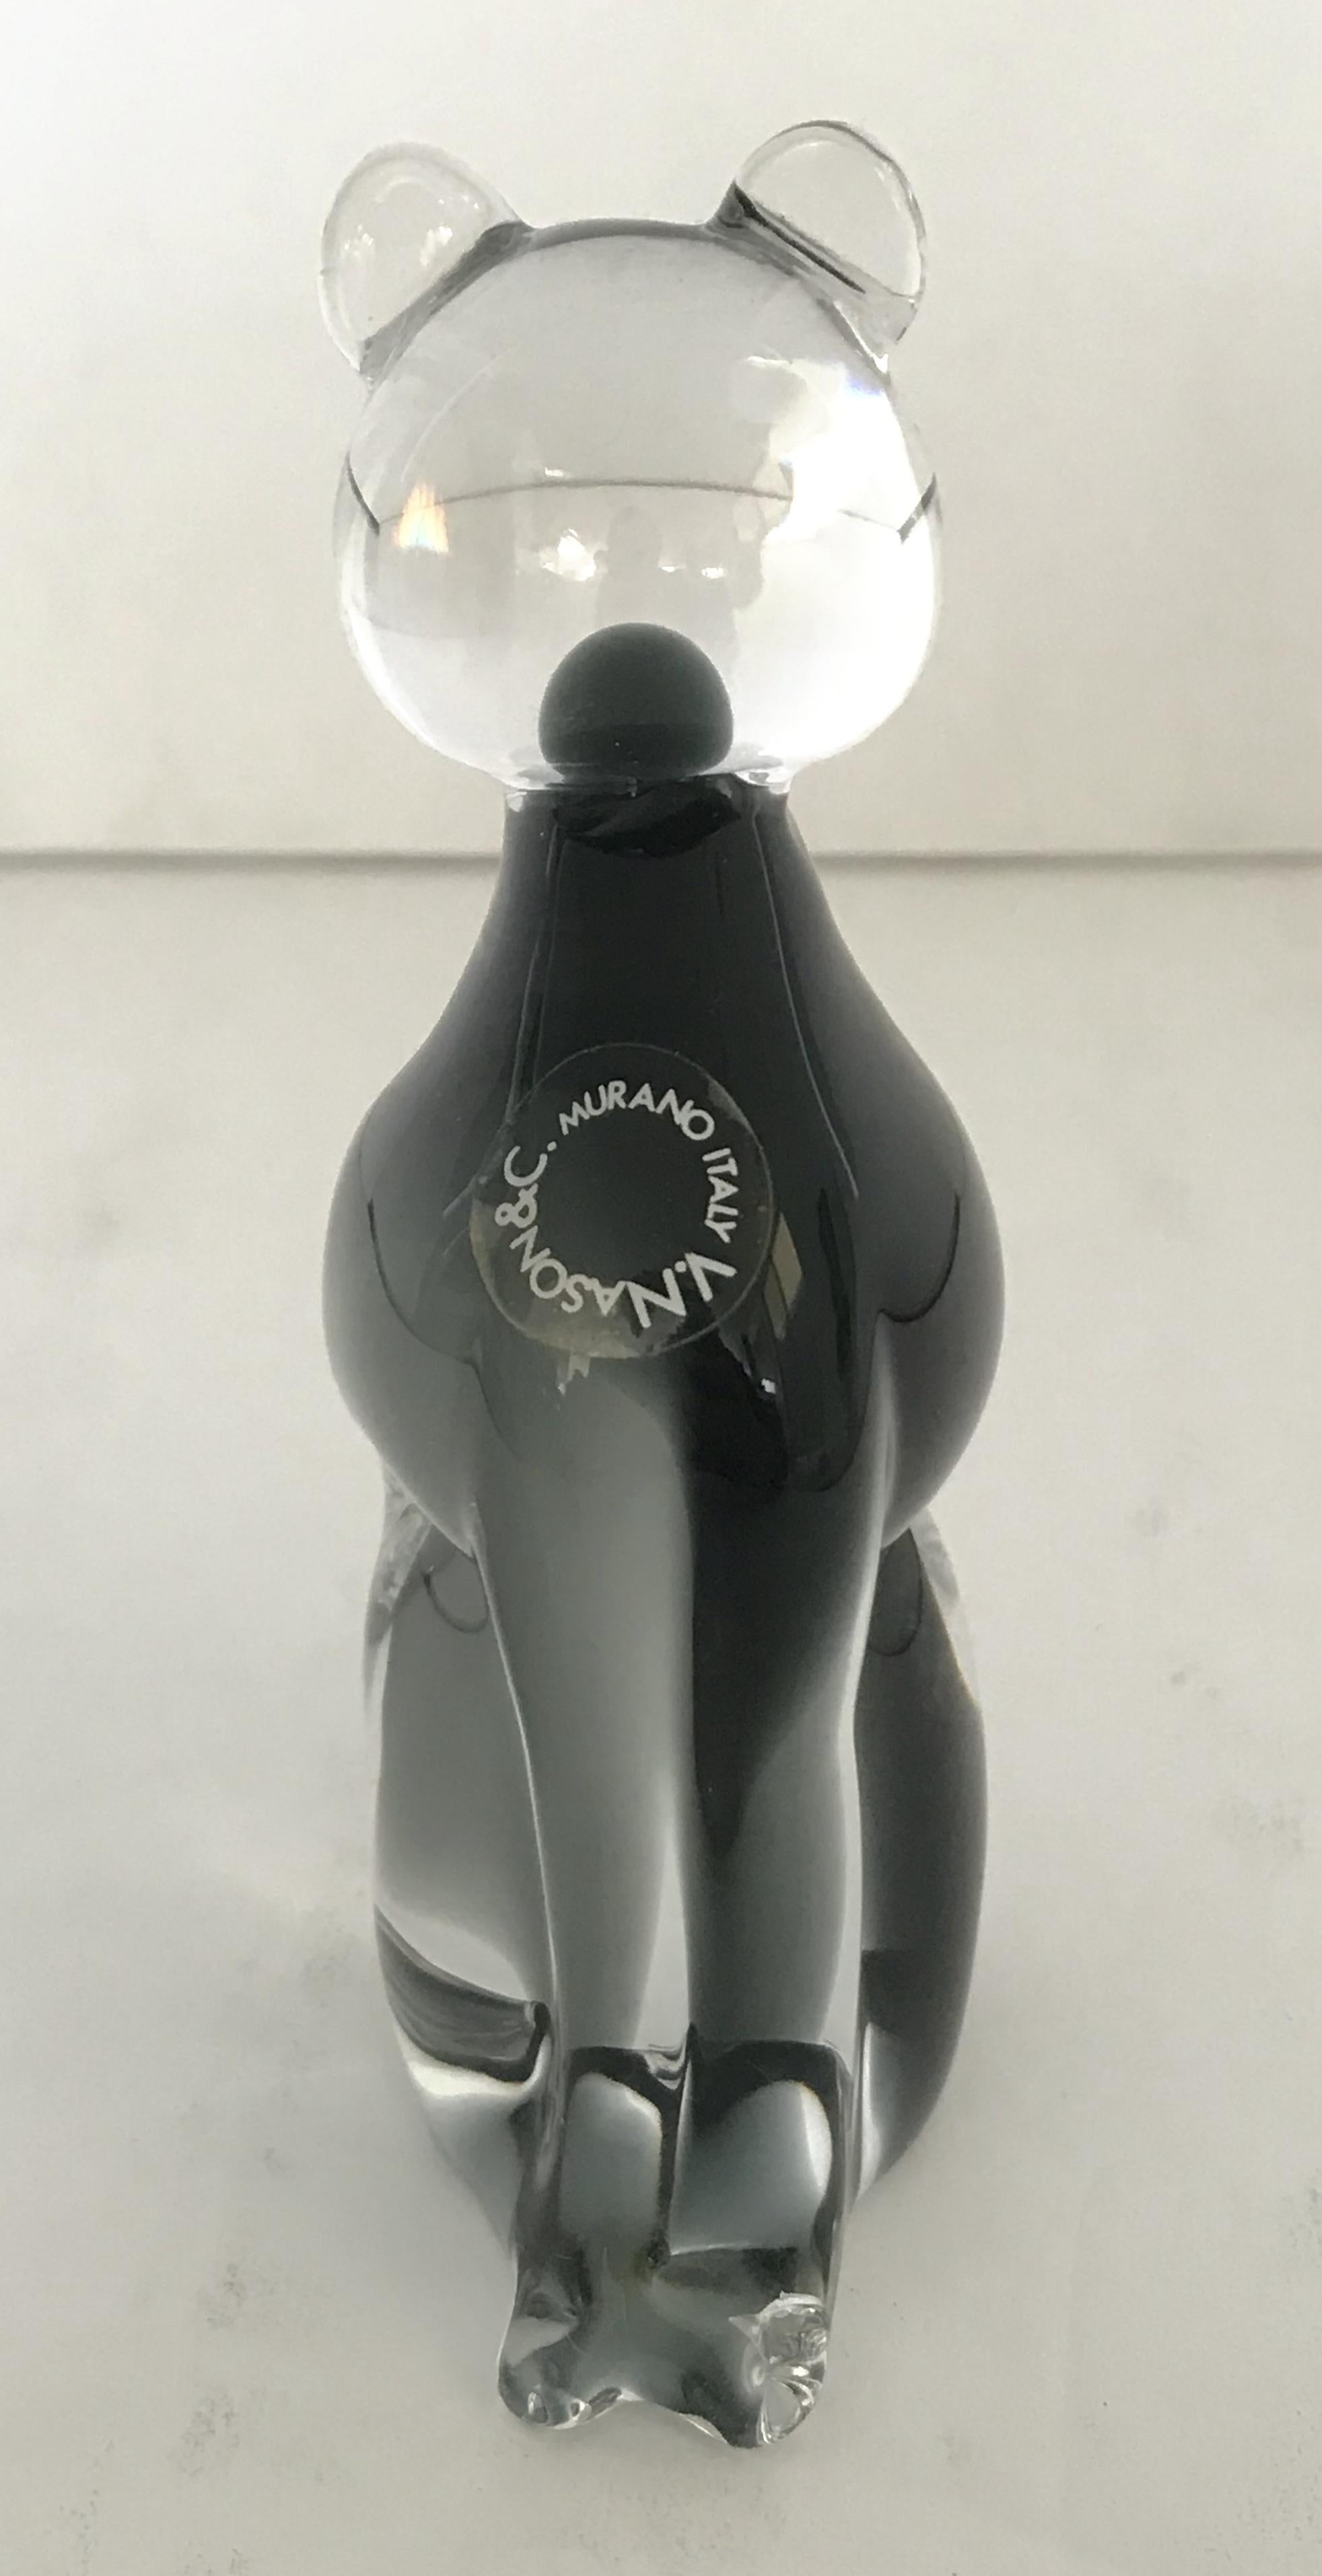 Vintage hand blown Murano glass cat sculpture with beautiful smoky gray gradient / Made in Italy by V. Nason & Co, circa 1970s
Original sticker on the body
Measures: height 5.5 inches, width 2.5 inches, depth 1.5 inches
1 in stock in Palm Springs ON